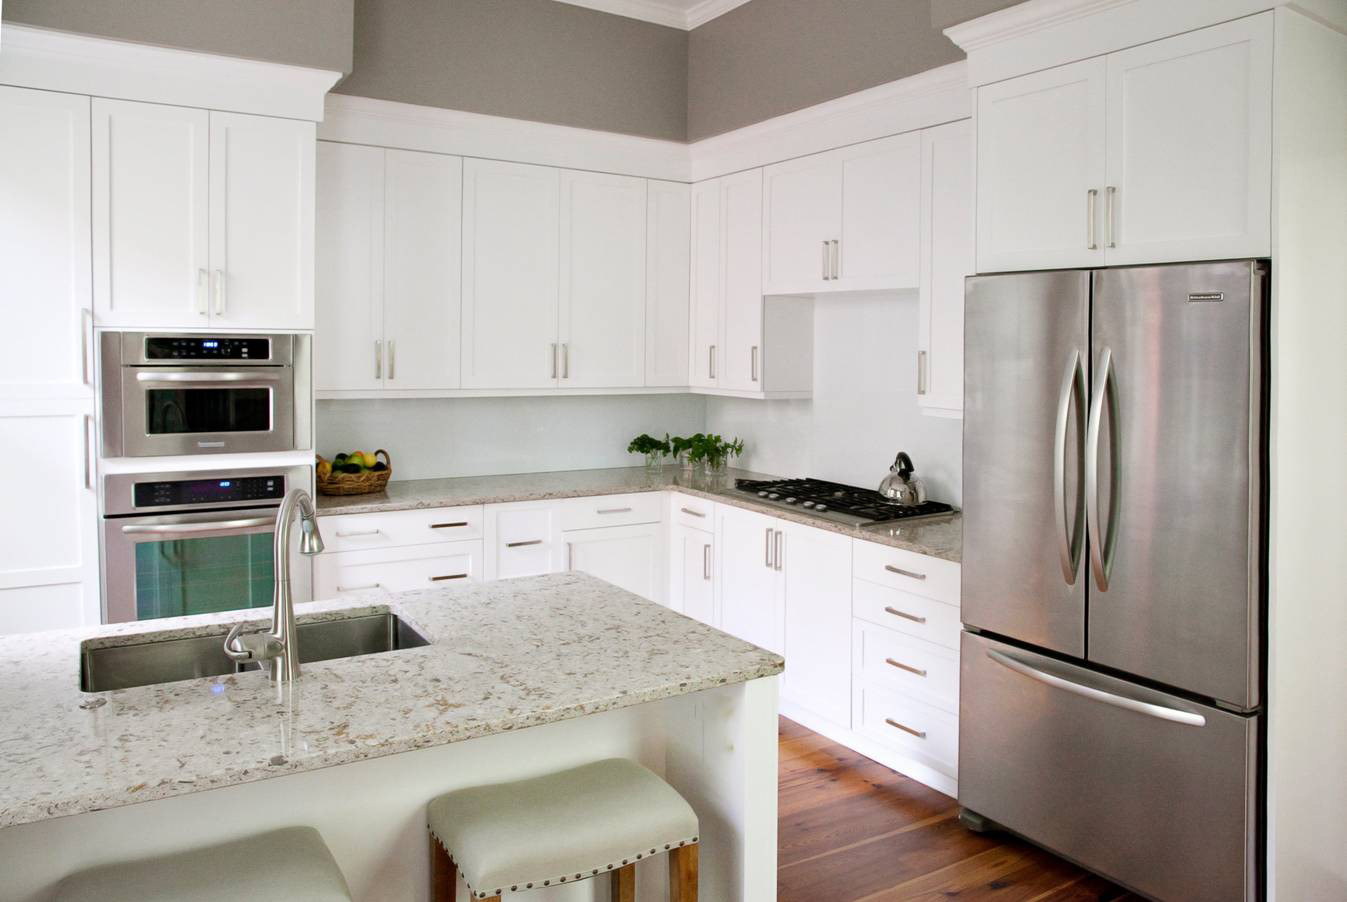 Kitchen Wall Colors
 Most Popular Kitchen Cabinet Colors in 2019